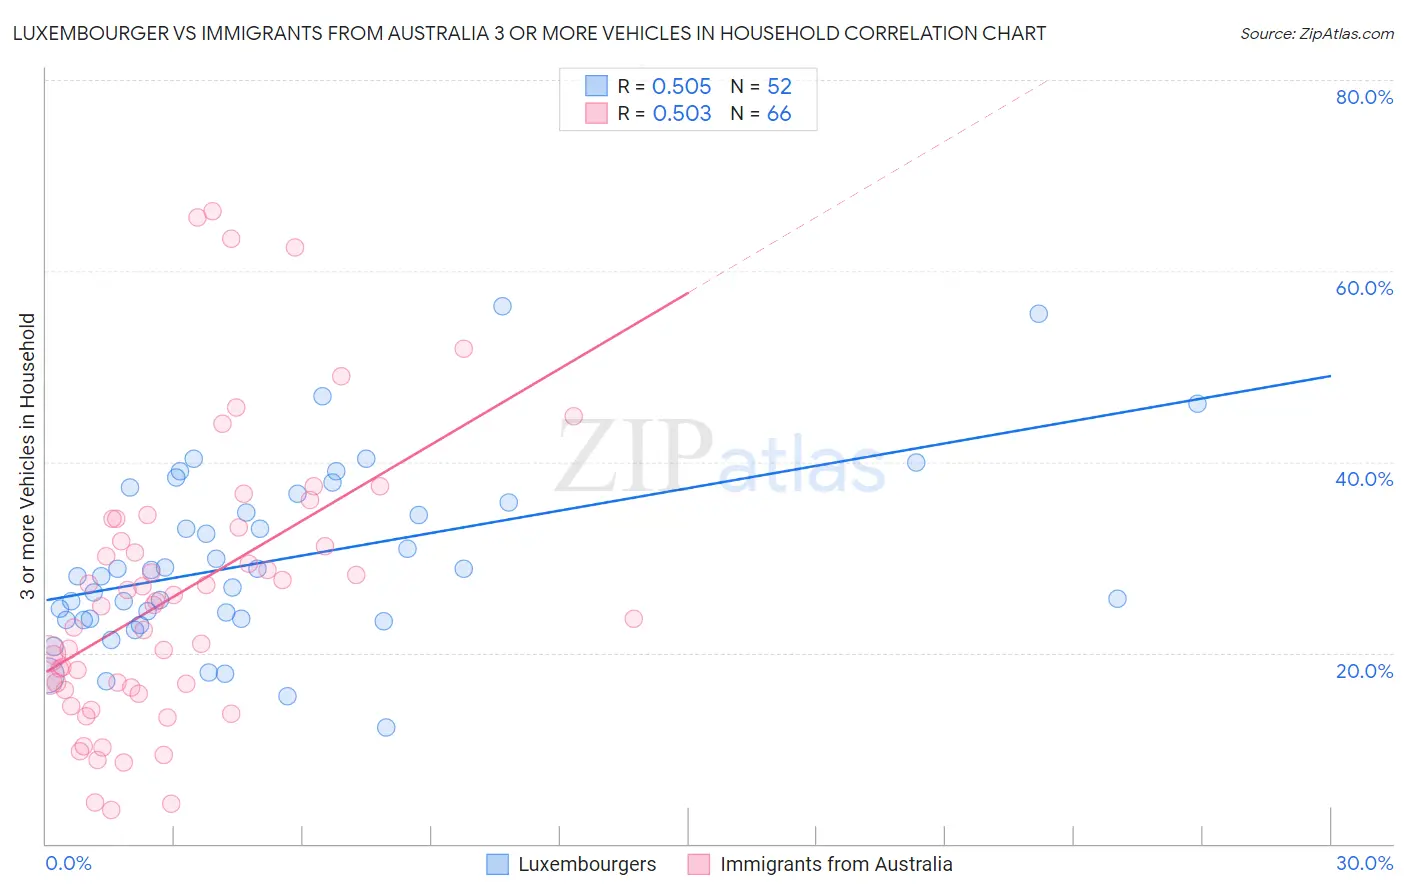 Luxembourger vs Immigrants from Australia 3 or more Vehicles in Household